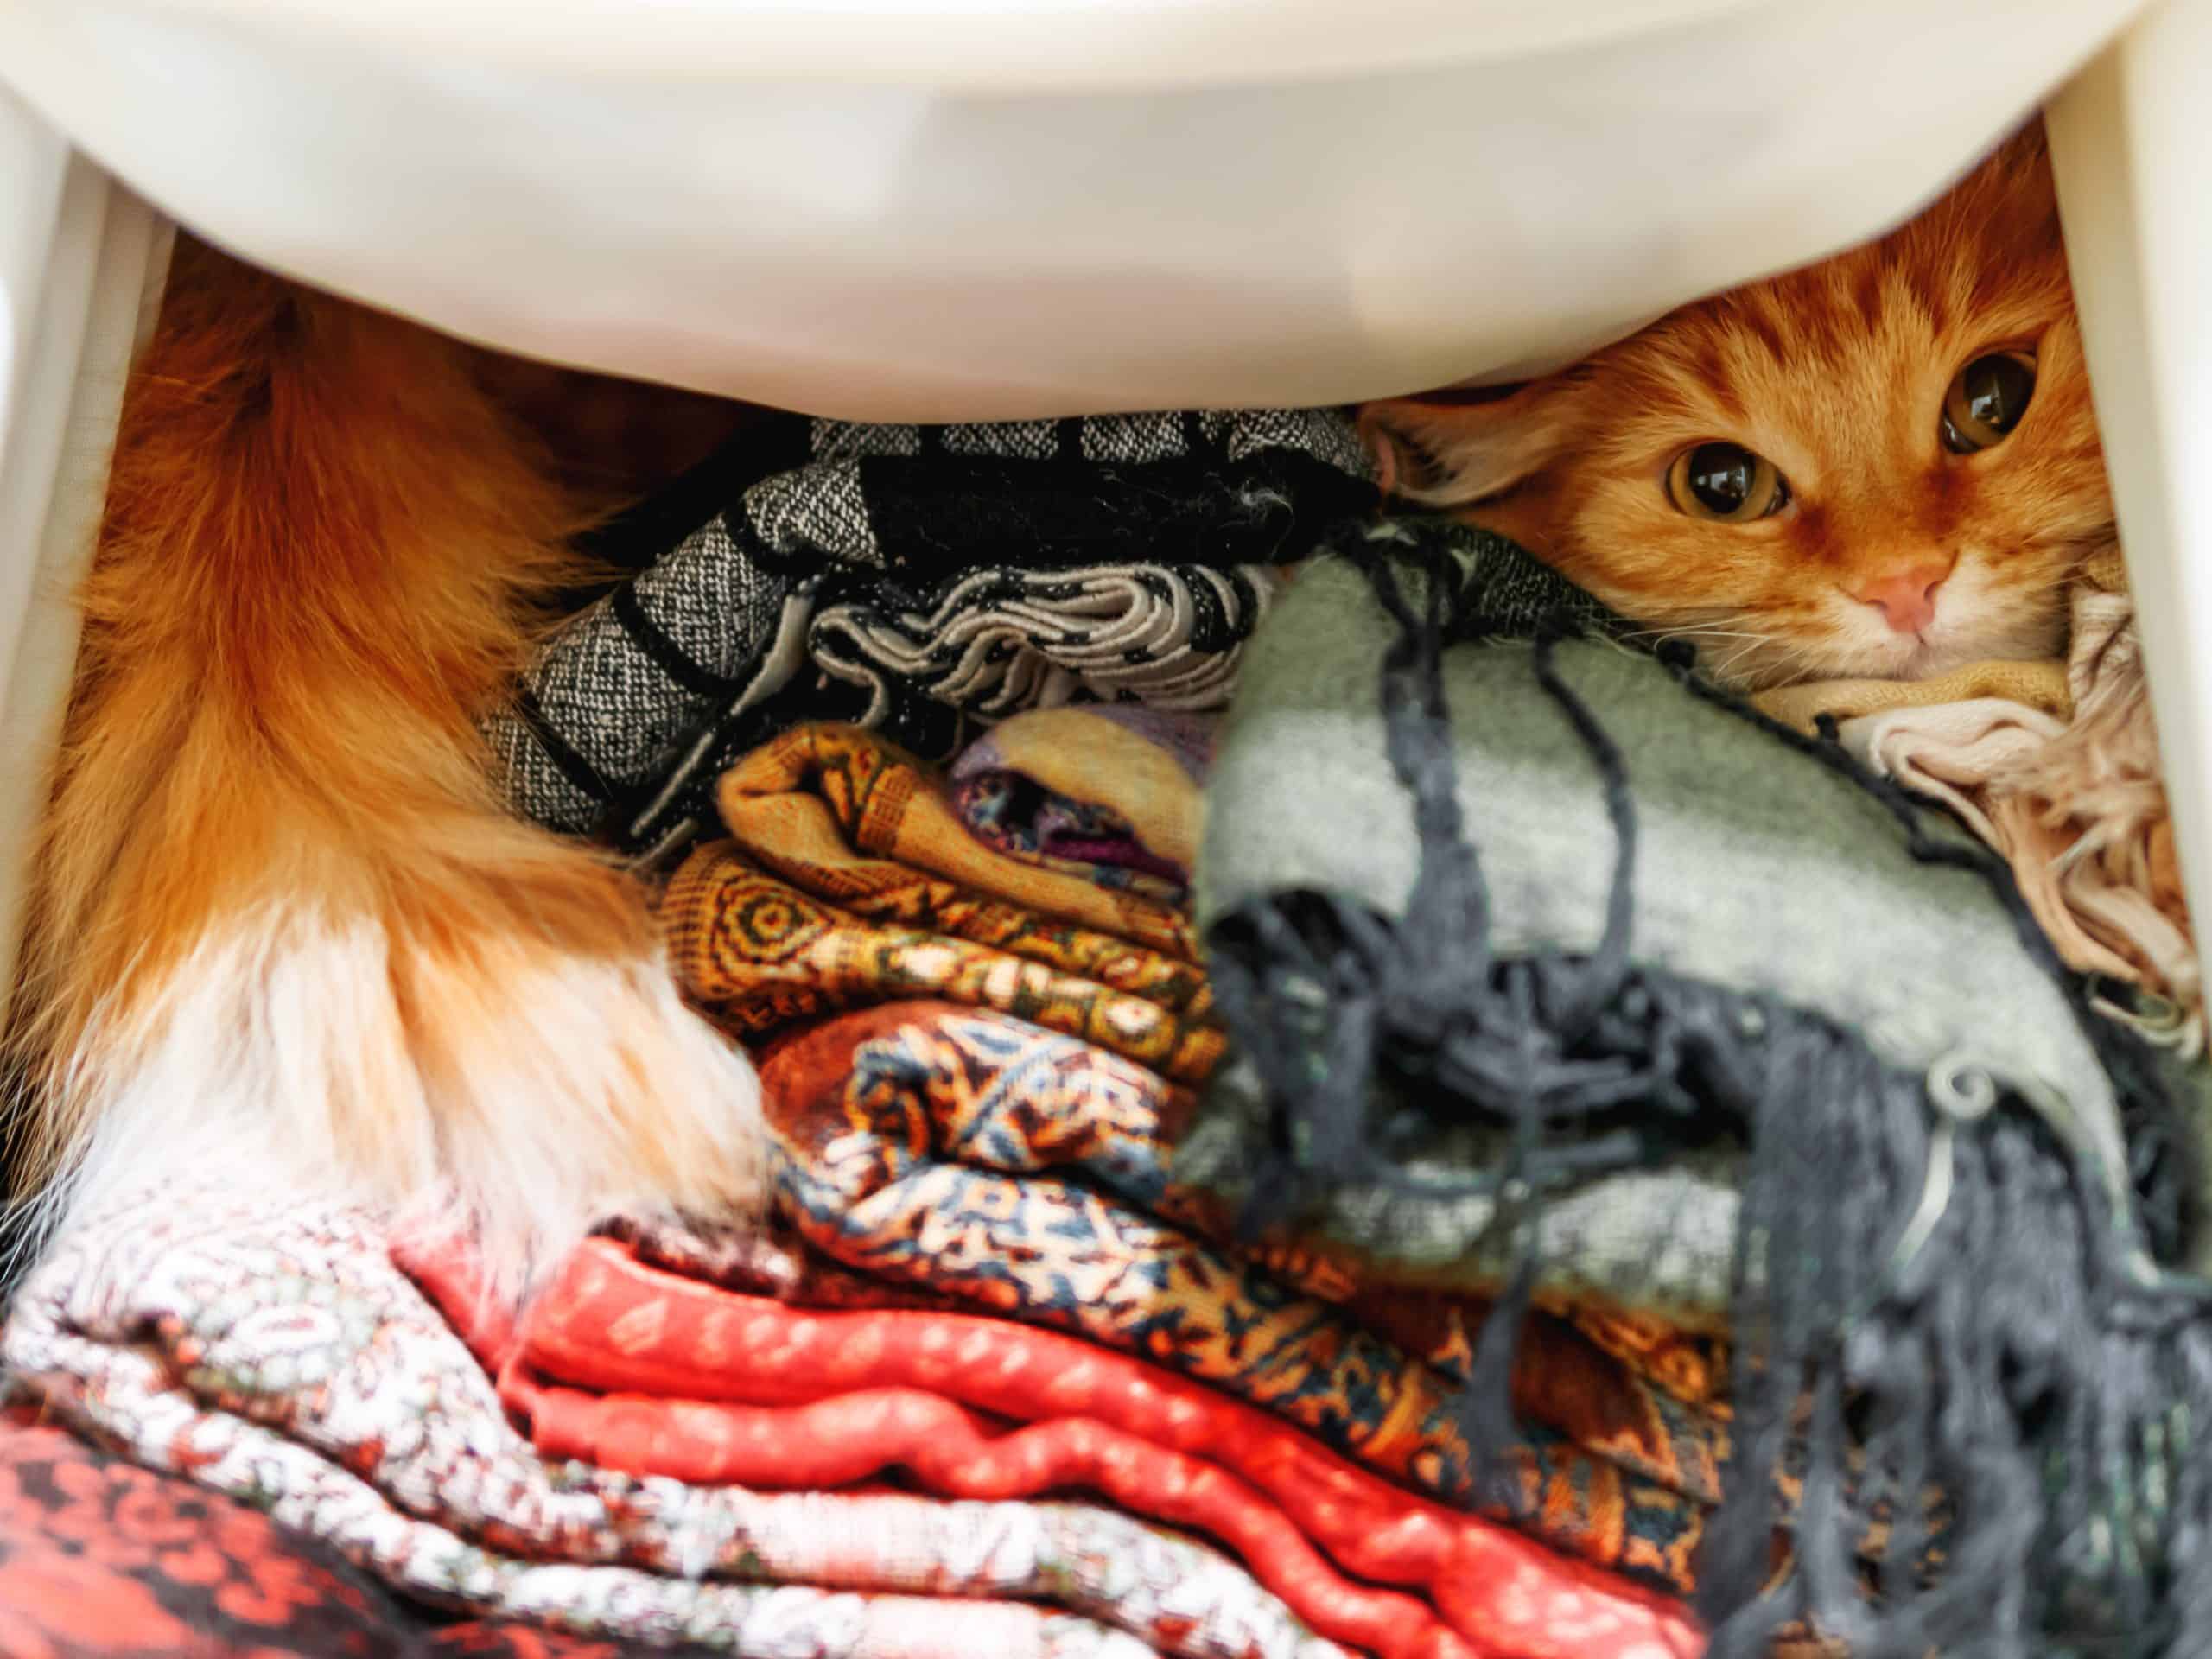 Cute ginger cat sitting on a pile of colorful scarfs in wardrobe.